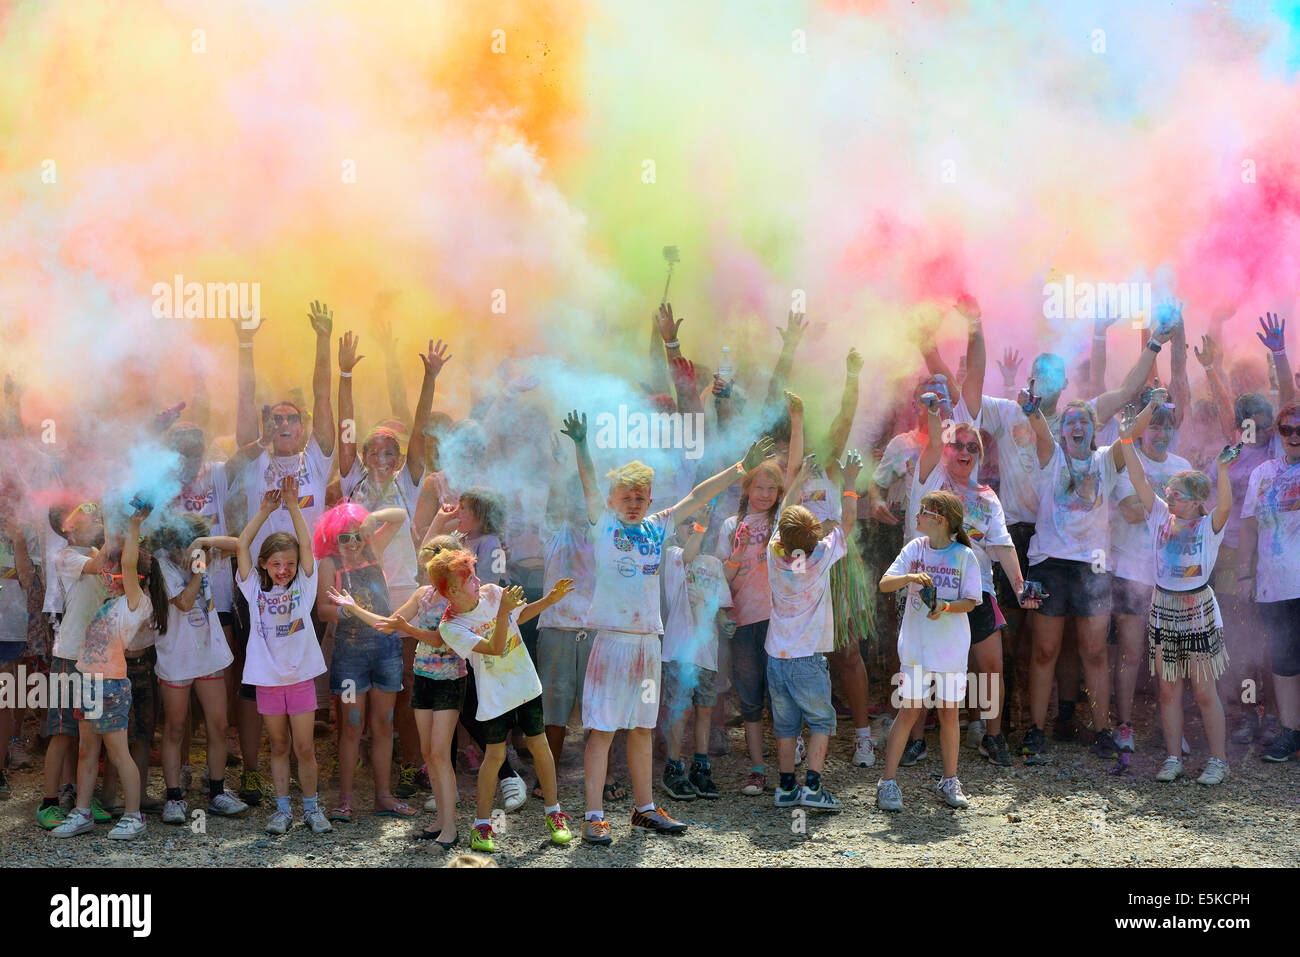 Hastings. East Sussex. UK. 3rd August 2014. Participants in The Colour The Coast fun run along the seafront of the old town. Runners along the 4K course had to pass through four colour zones where willing helpers known as ‘Cherry Chuckers’ showered runners with a coloured dye before a finish line party extravaganza involving everyone throwing powder into the sky to create a colour cloud. This was a fundraising event for St Michael’s Hospice in St Leonards on Sea. Credit:  Parkerphotography / Alamy Live News Stock Photo